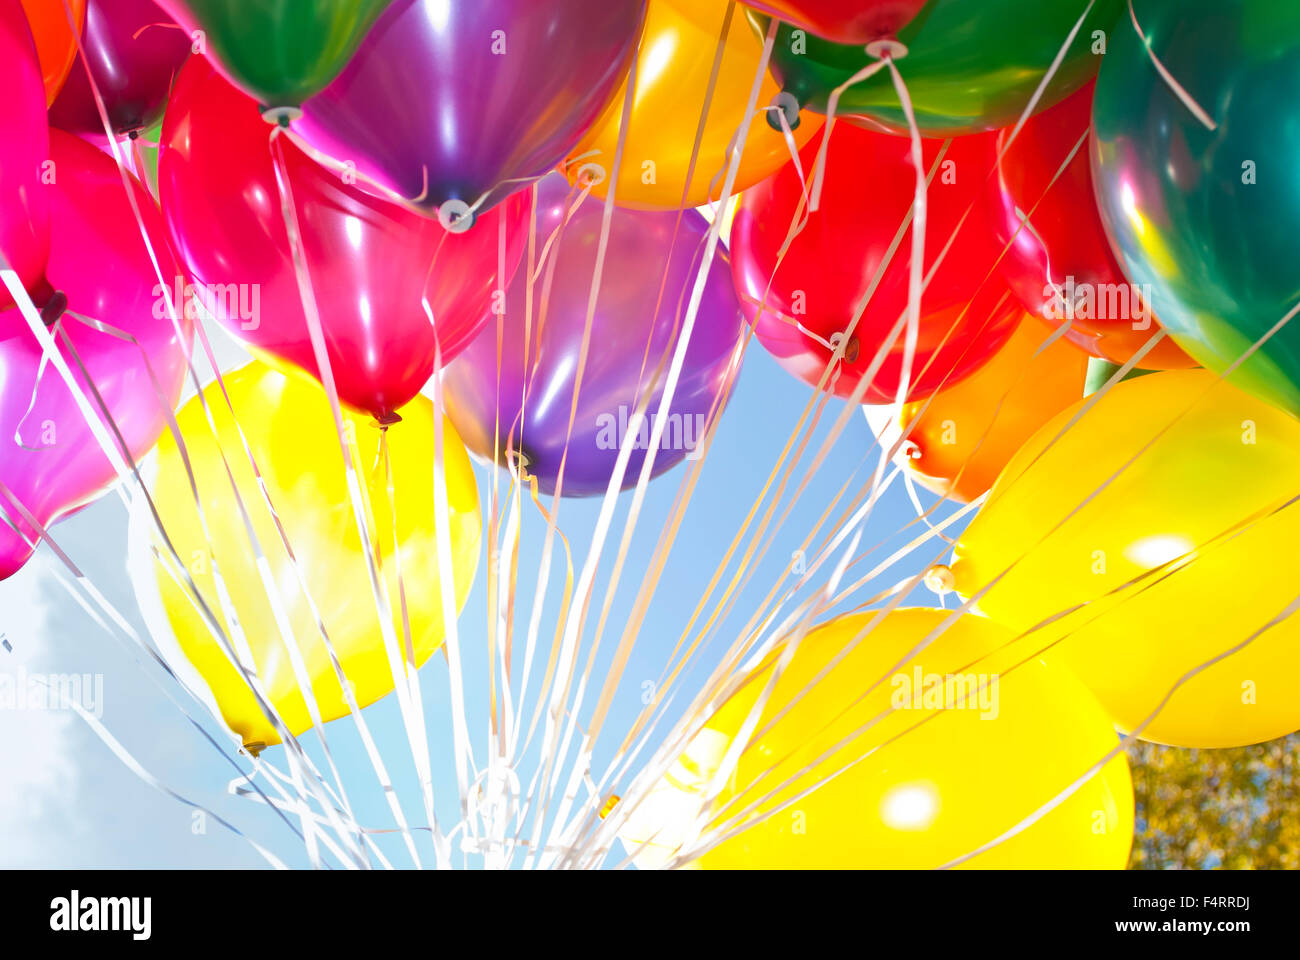 Colourful helium-filled balloons against a blue sky Stock Photo